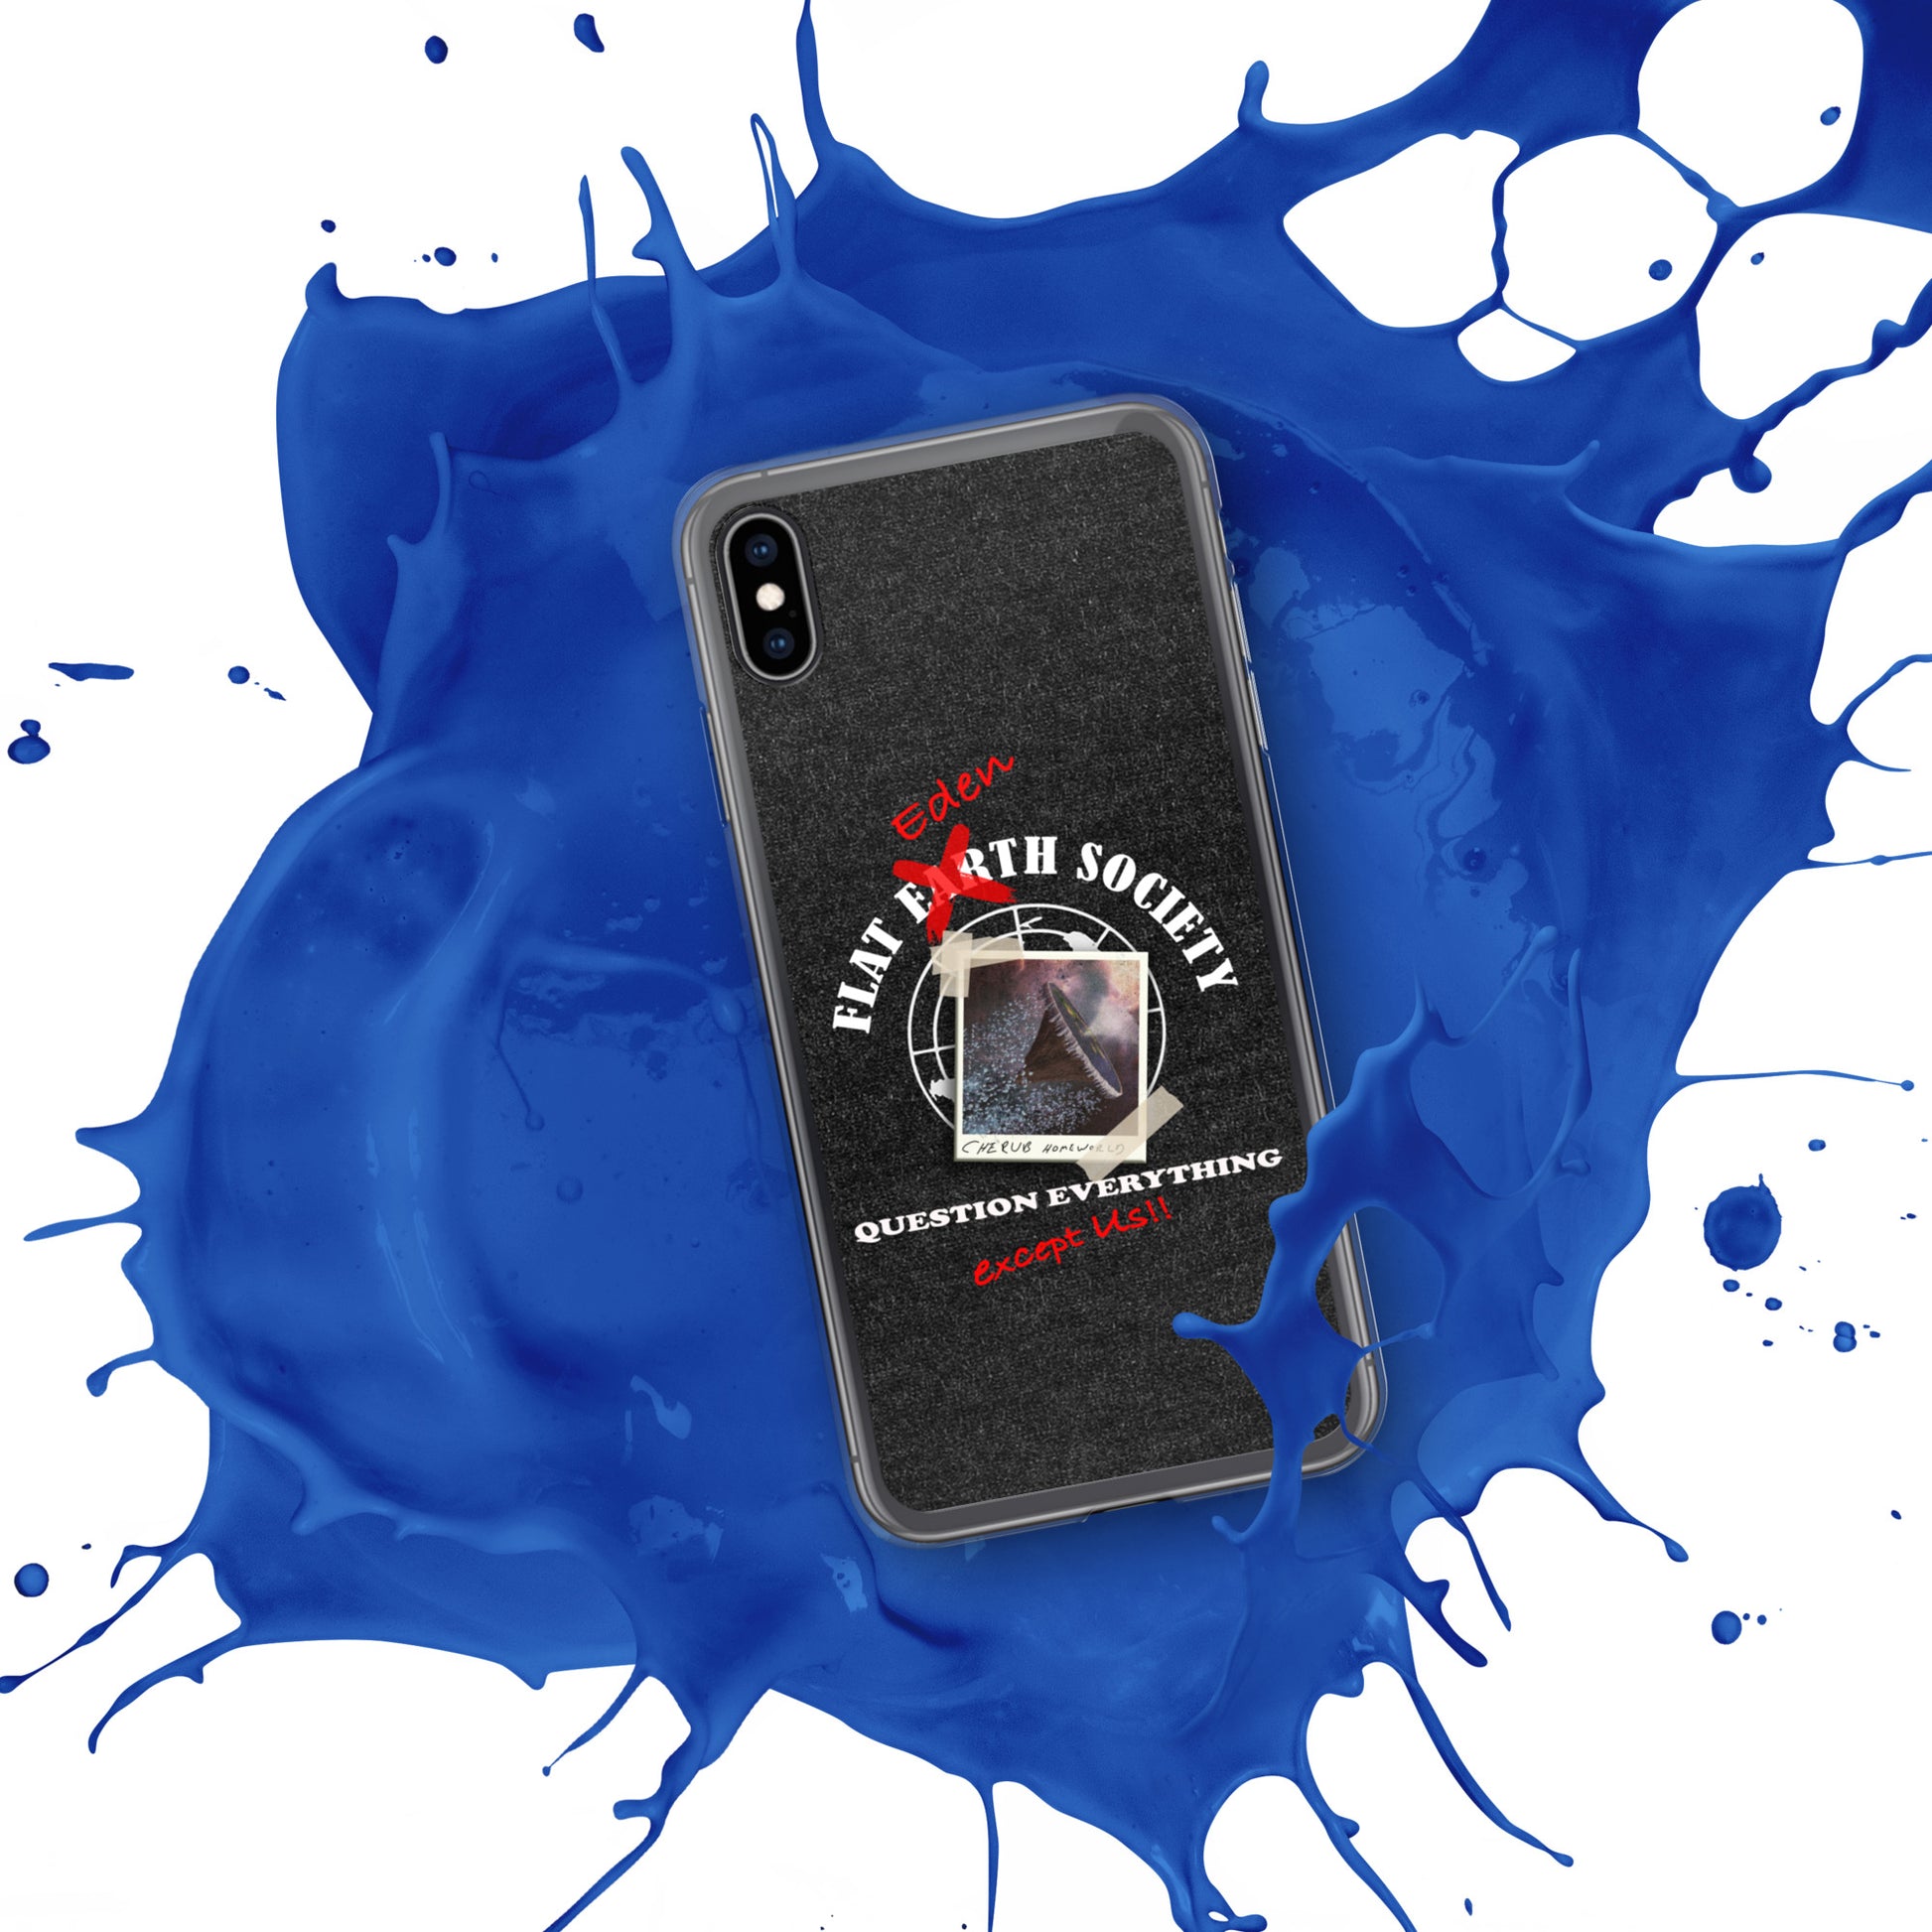 iPhone Case | Intergalactic Space Force 2 | Flat Eden Society - Spectral Ink Shop - Mobile Phone Cases -9780728_9621